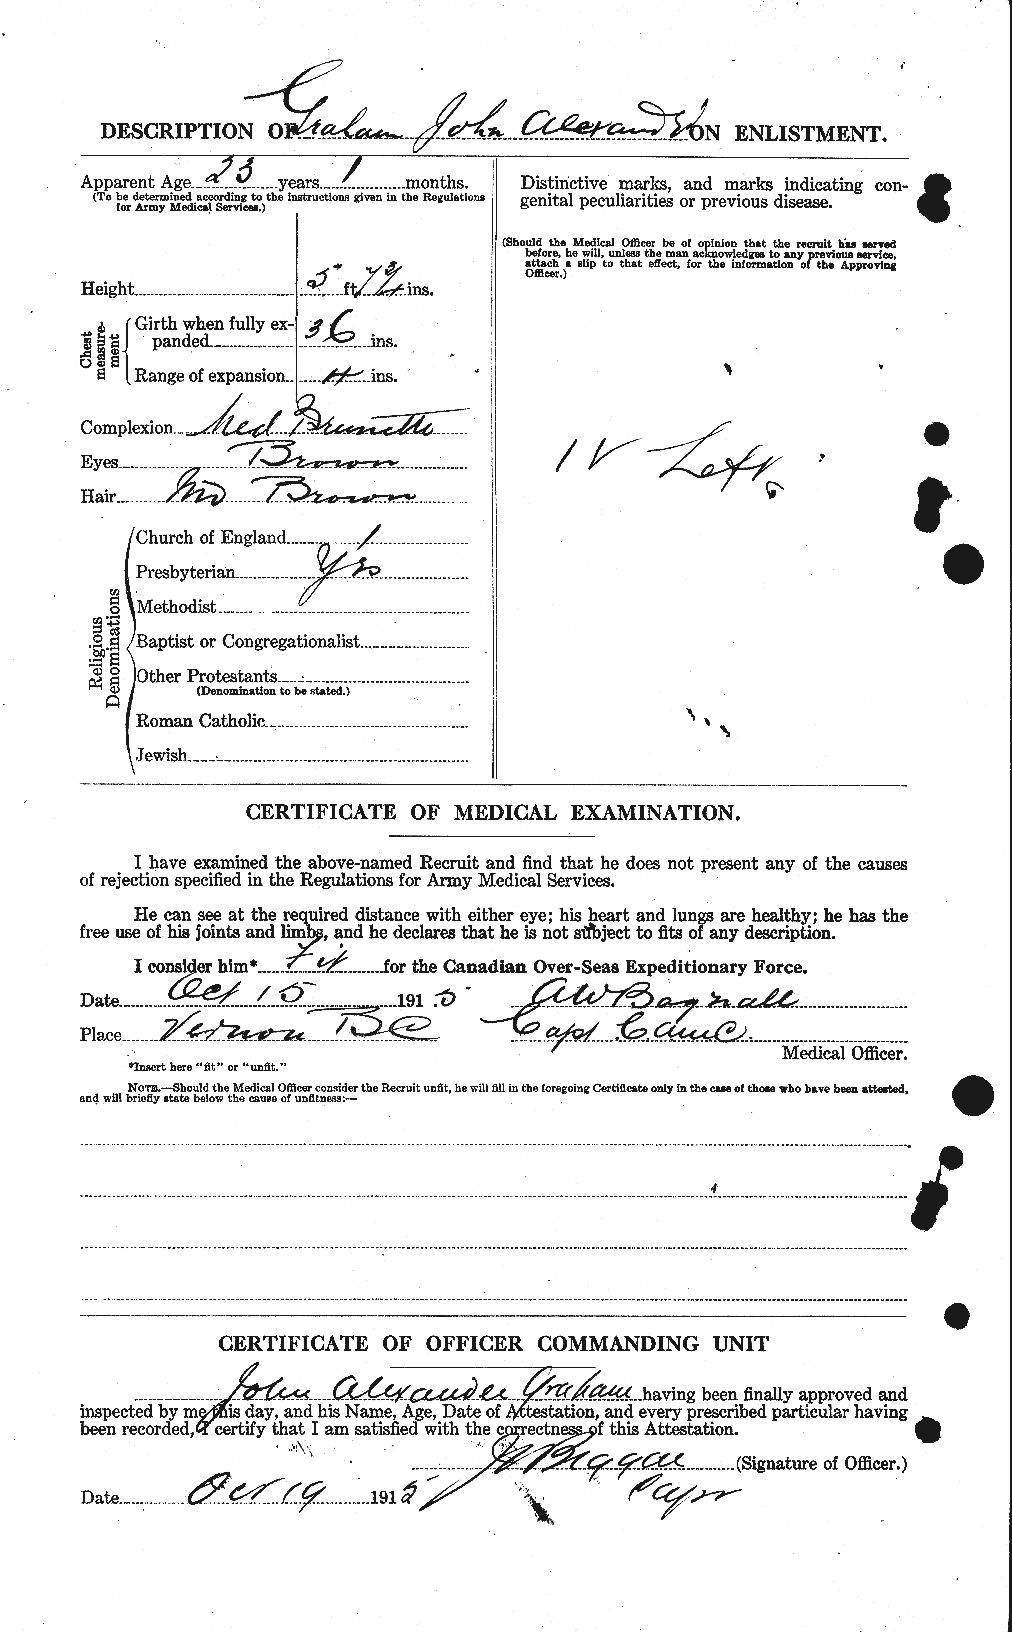 Personnel Records of the First World War - CEF 359153b